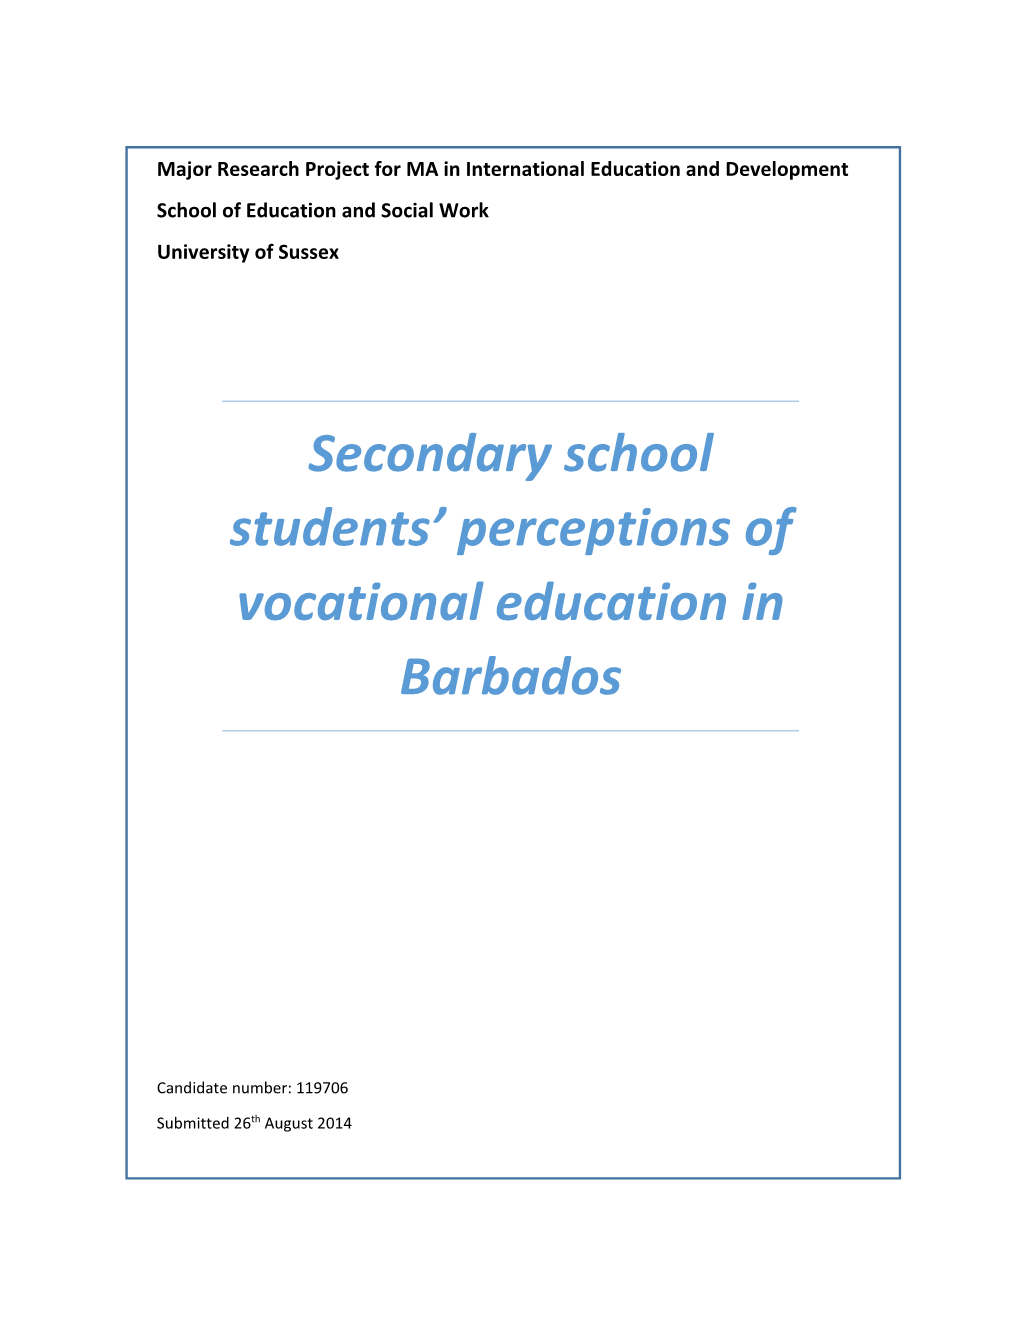 Secondary School Students' Perceptions of Vocational Education in Barbados